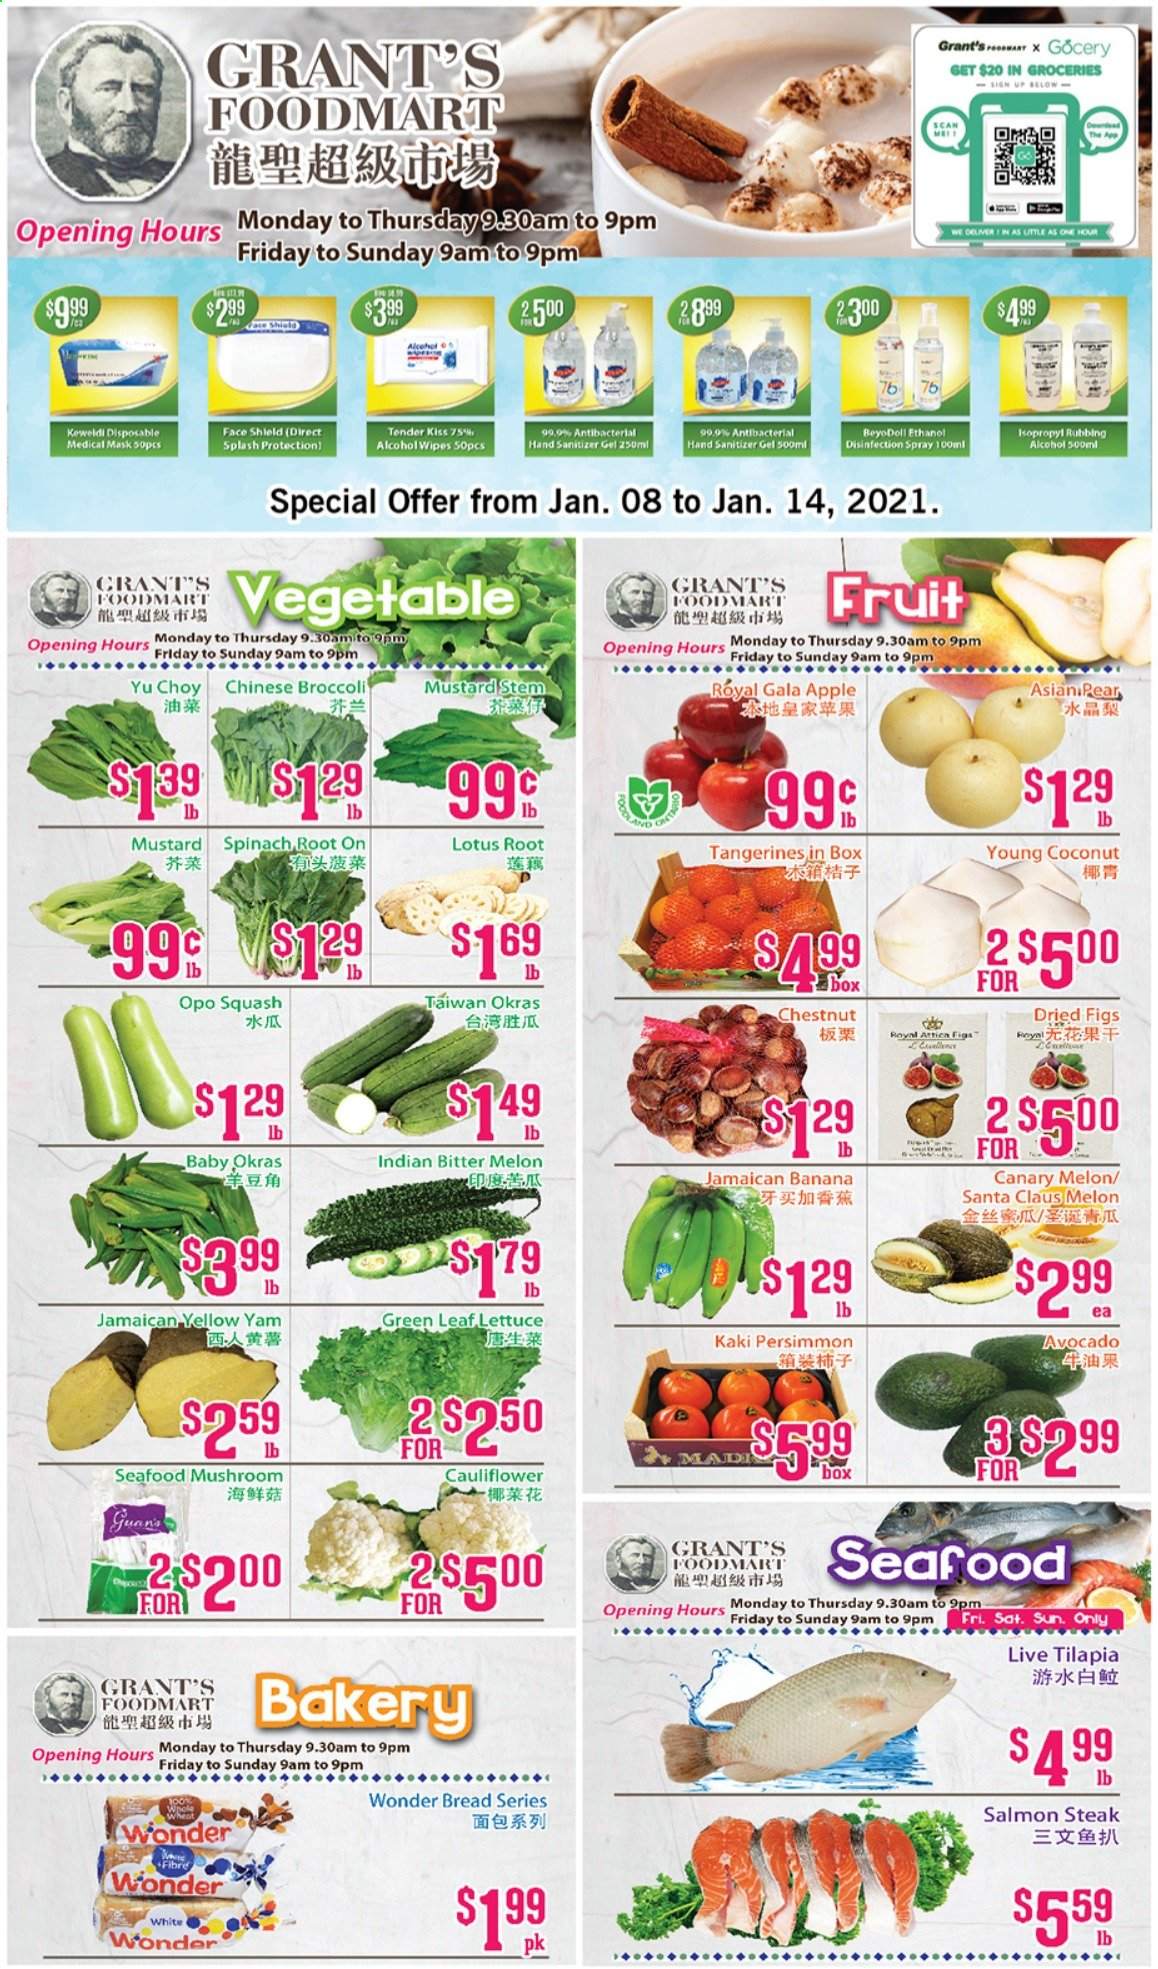 thumbnail - Grant's Foodmart Flyer - January 08, 2021 - January 14, 2021 - Sales products - mushrooms, bread, broccoli, cauliflower, spinach, lettuce, avocado, figs, Gala, tangerines, persimmons, coconut, melons, salmon, tilapia, seafood, Santa, mustard, dried figs, Grant's, wipes, Lotus, hand sanitizer, chinese broccoli, steak. Page 1.